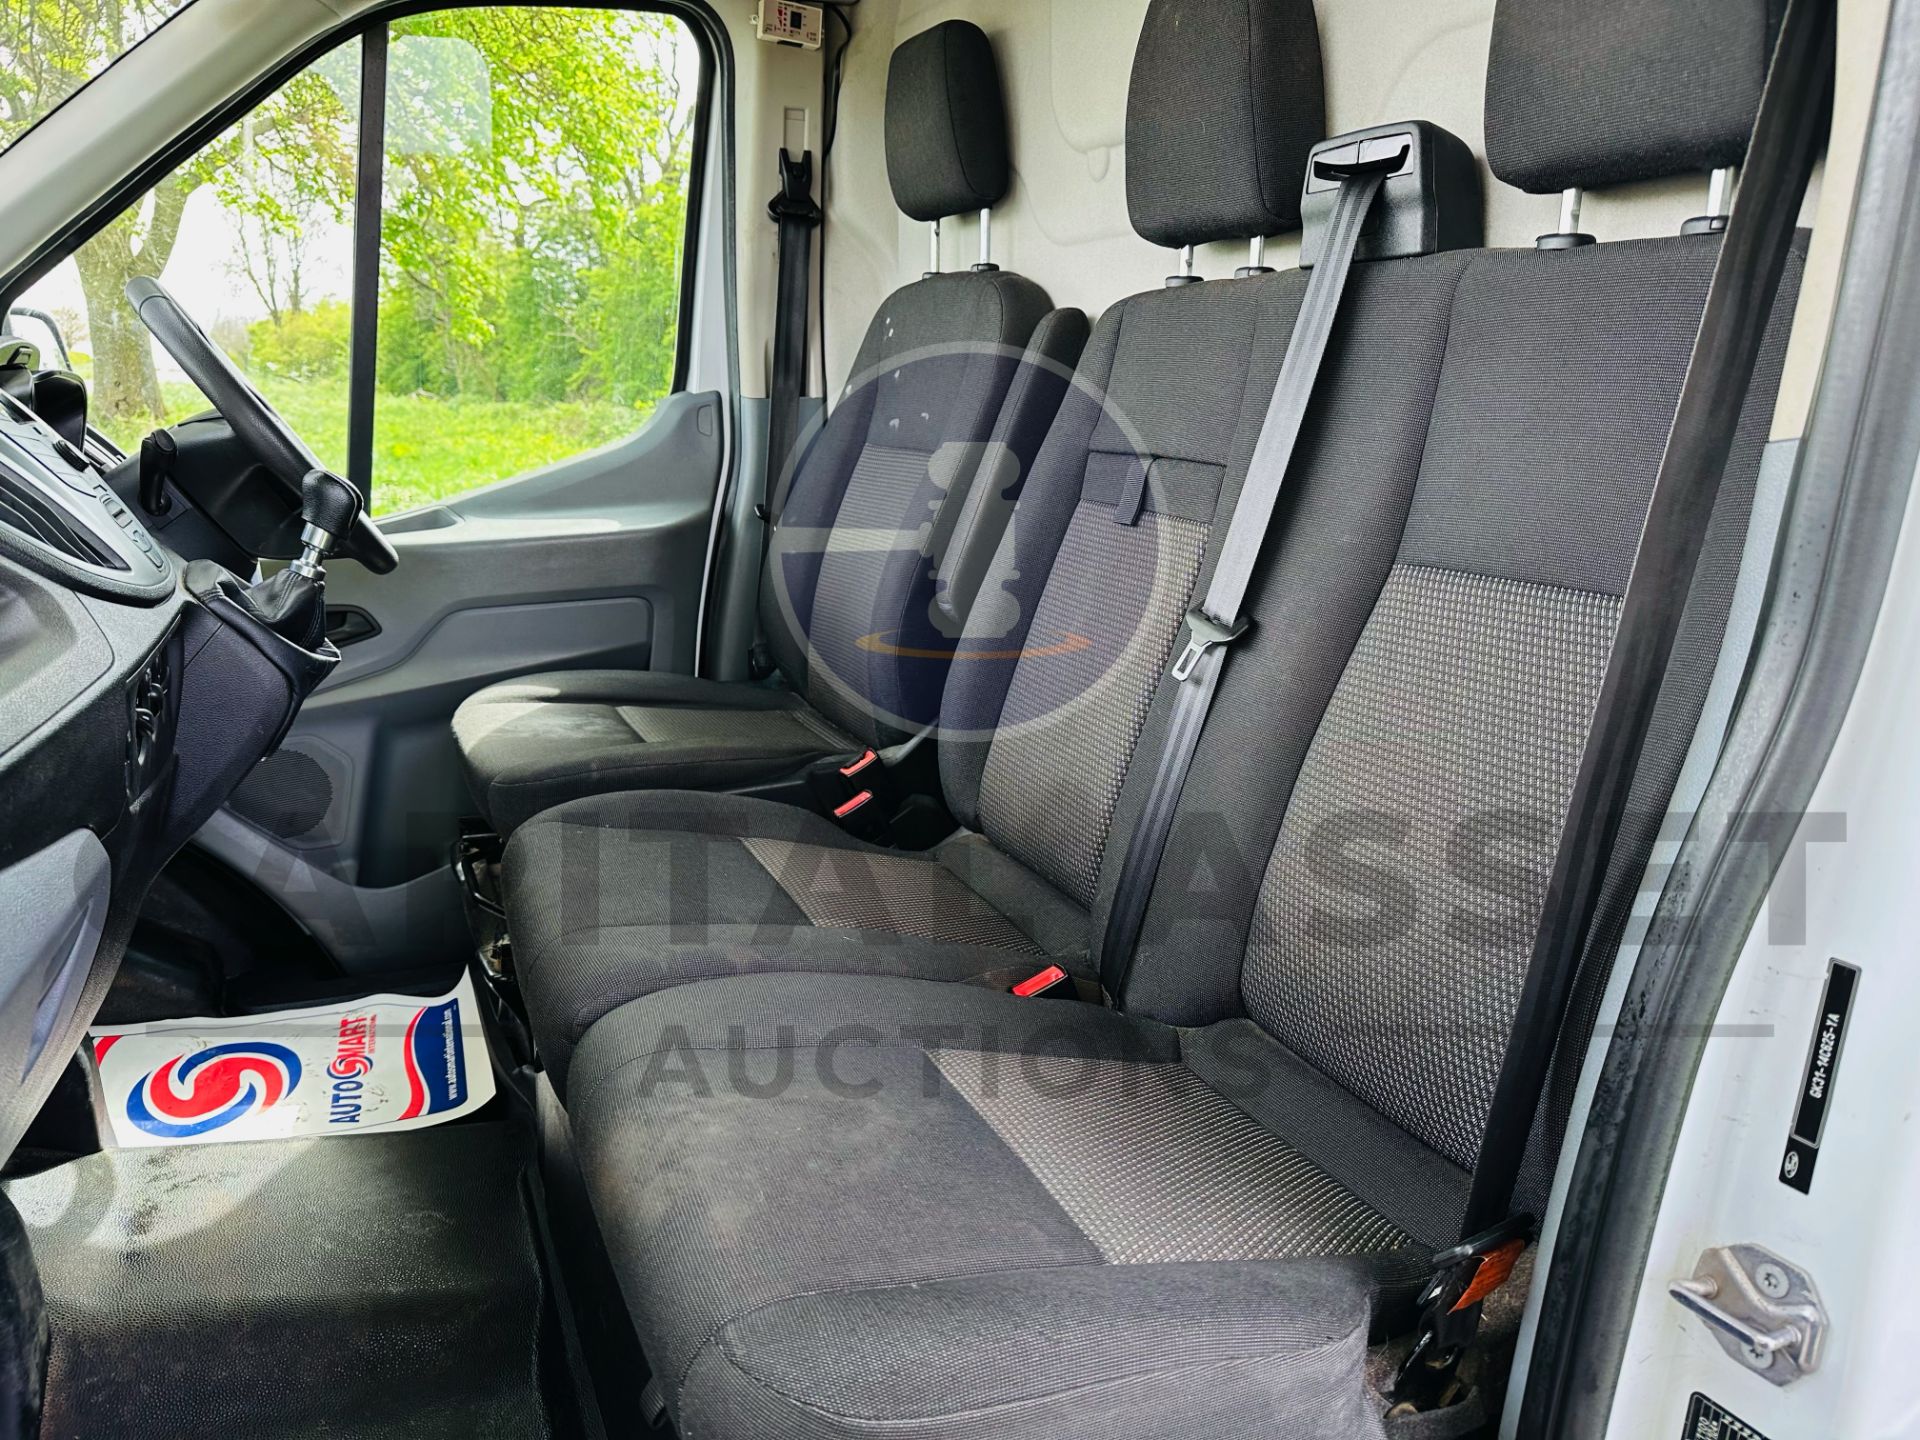 FORD TRANSIT 350 2.0 TDCI *ECOBLUE EDITION* LWB HIGH TOP - EURO 6 - 2019 MODEL - 1 OWNER - LOOK!!! - Image 19 of 32